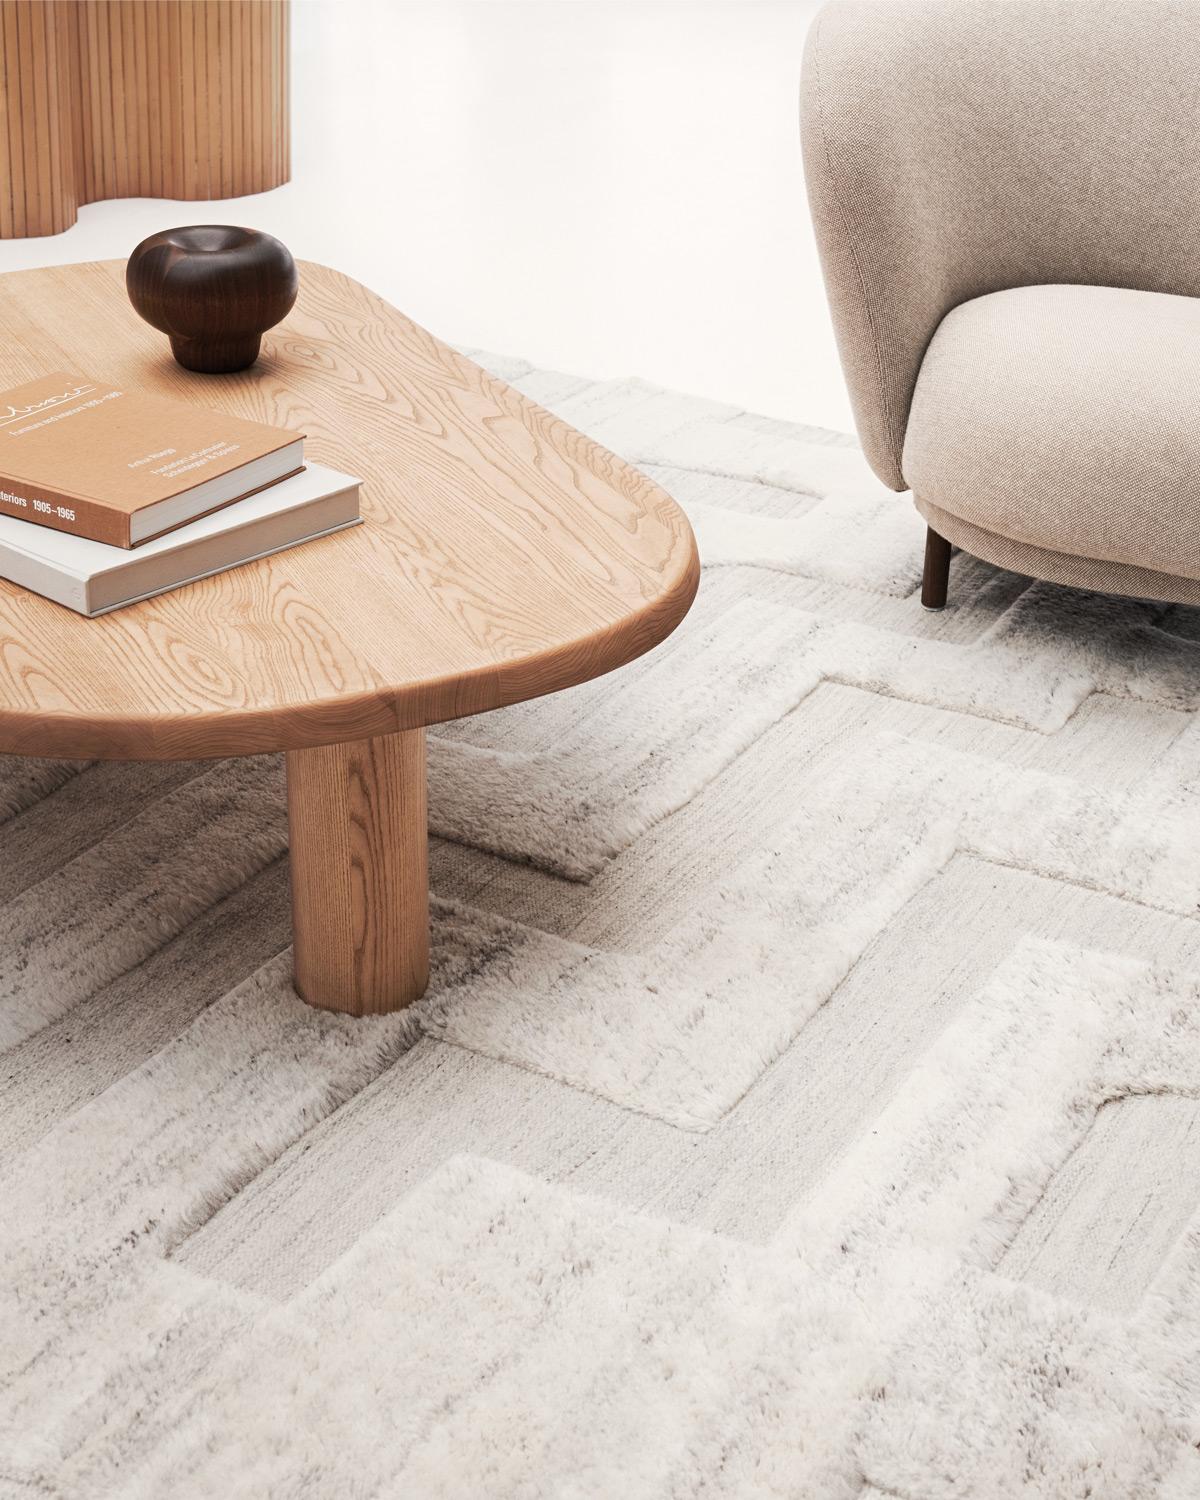 A bohemian Minimalist design, where ancient textures meet modern lines. Textured to the eye, yet soft to touch. The geometric pattern is inspired by the limestone steps of the grand stairs to historic Stockholm buildings.

With an all-natural,